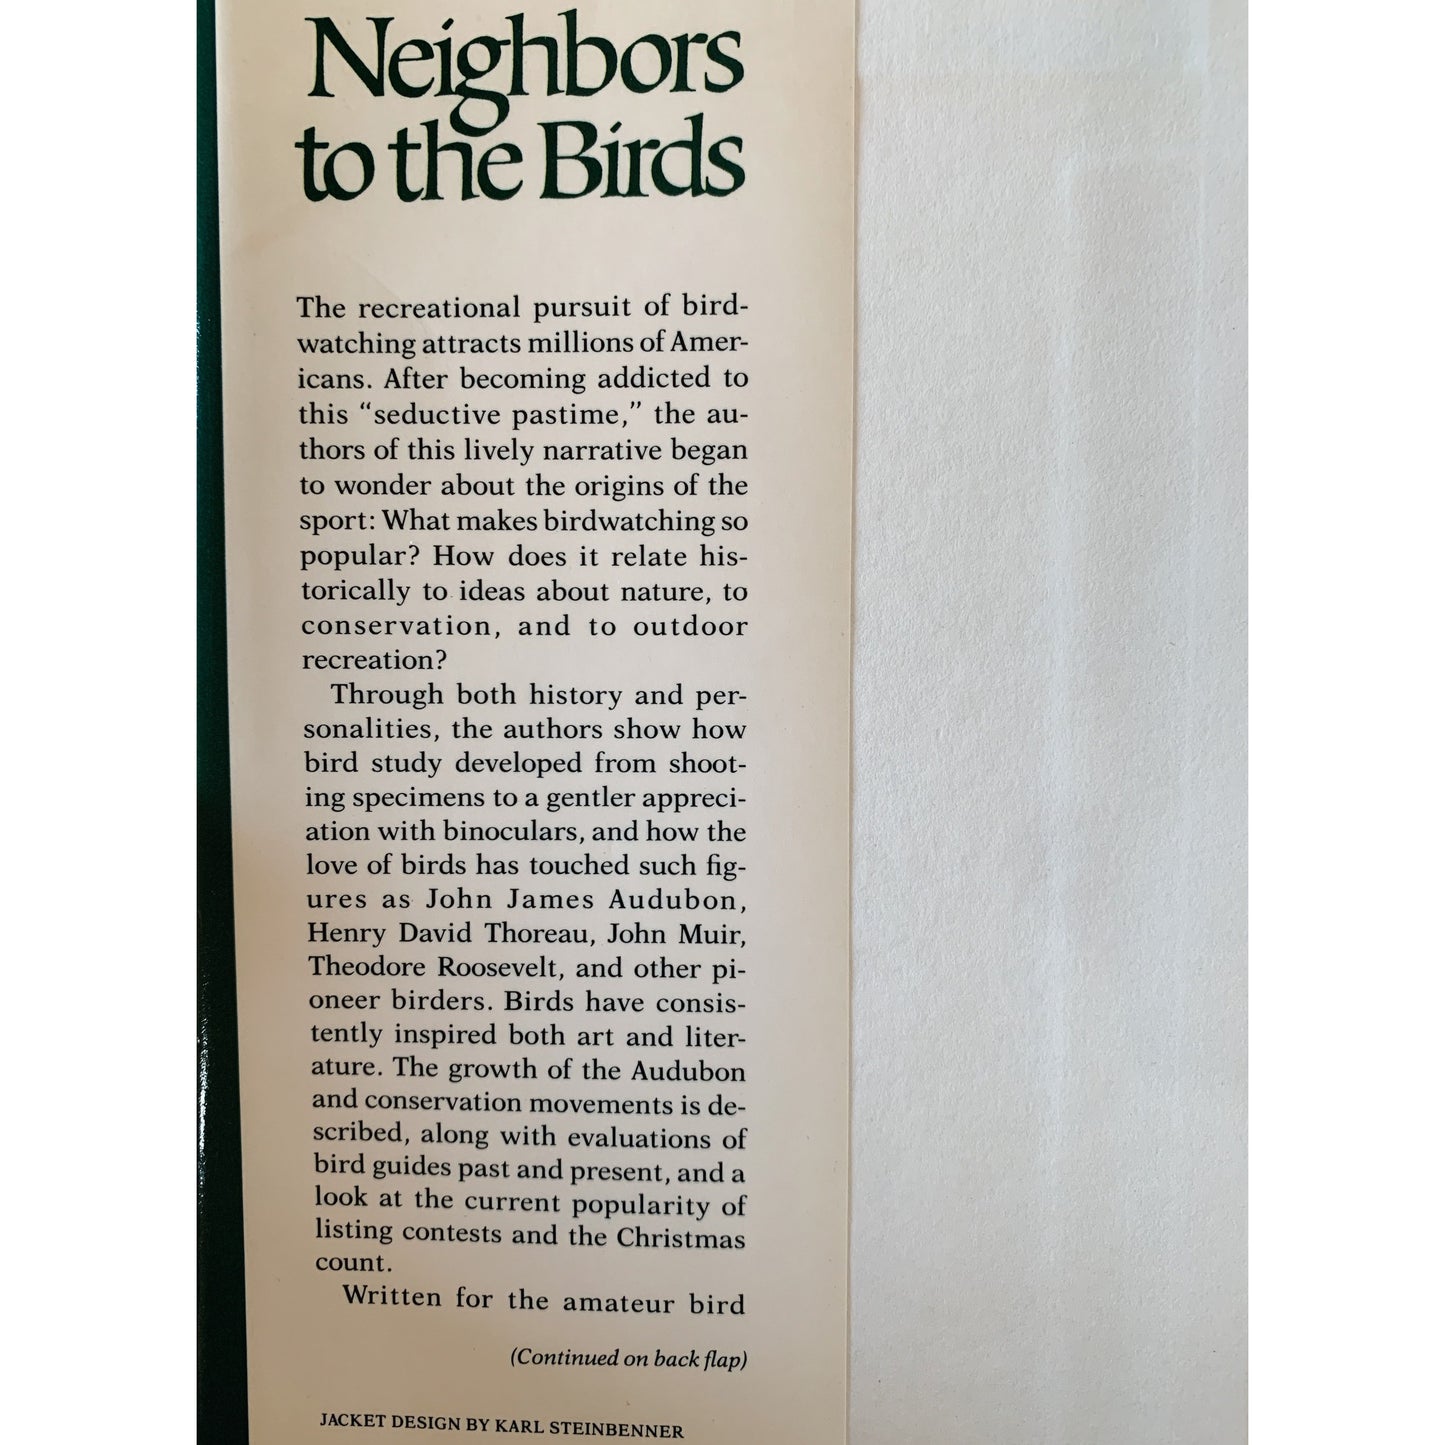 Neighbors to the Birds: A History of Birdwatchng in America, Hardcover 1988